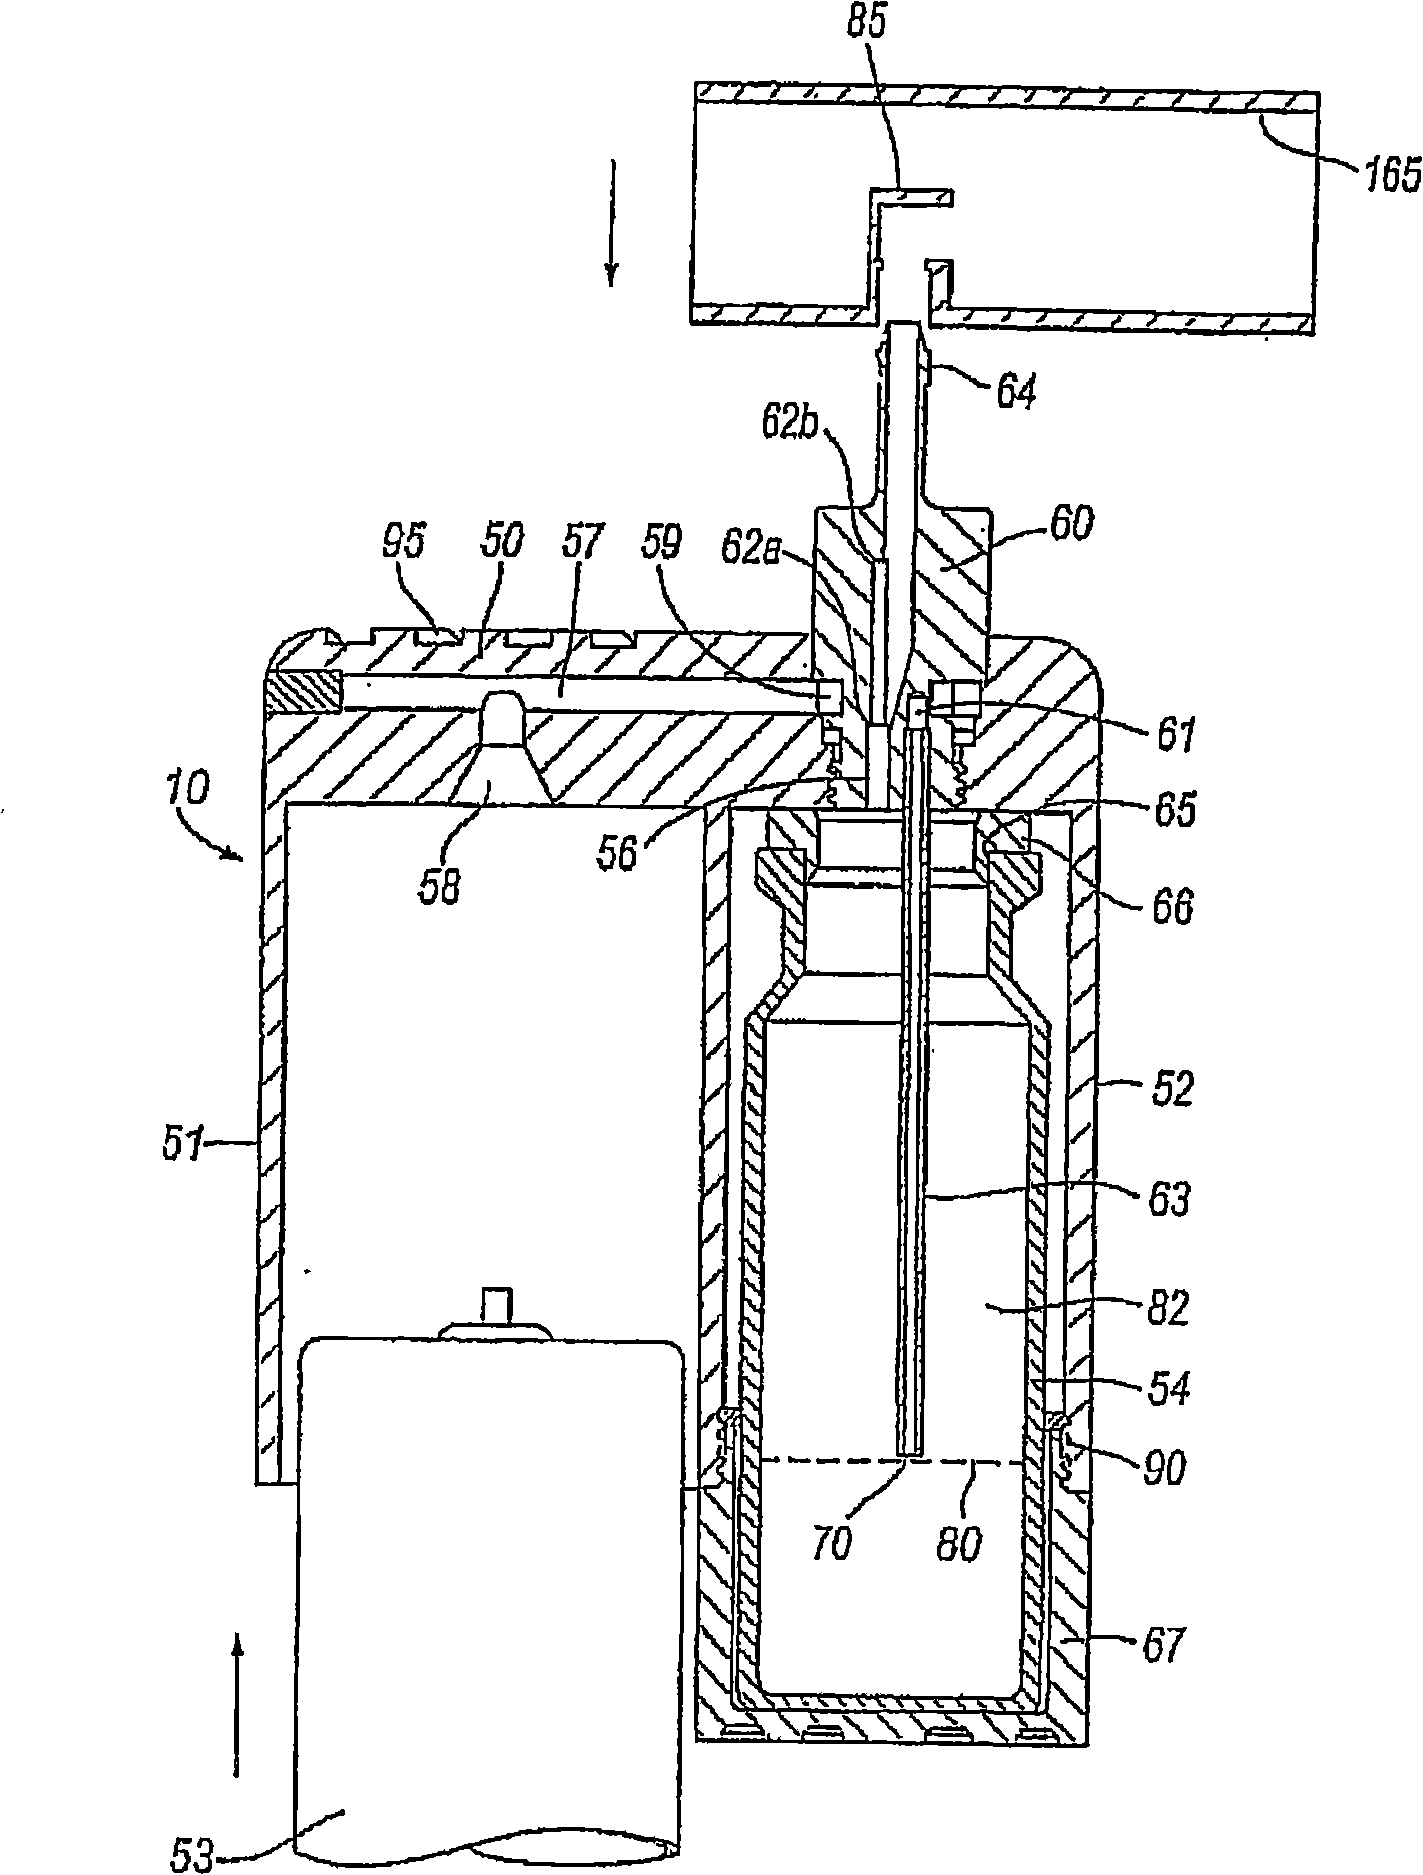 Delivery device for a powder aerosol